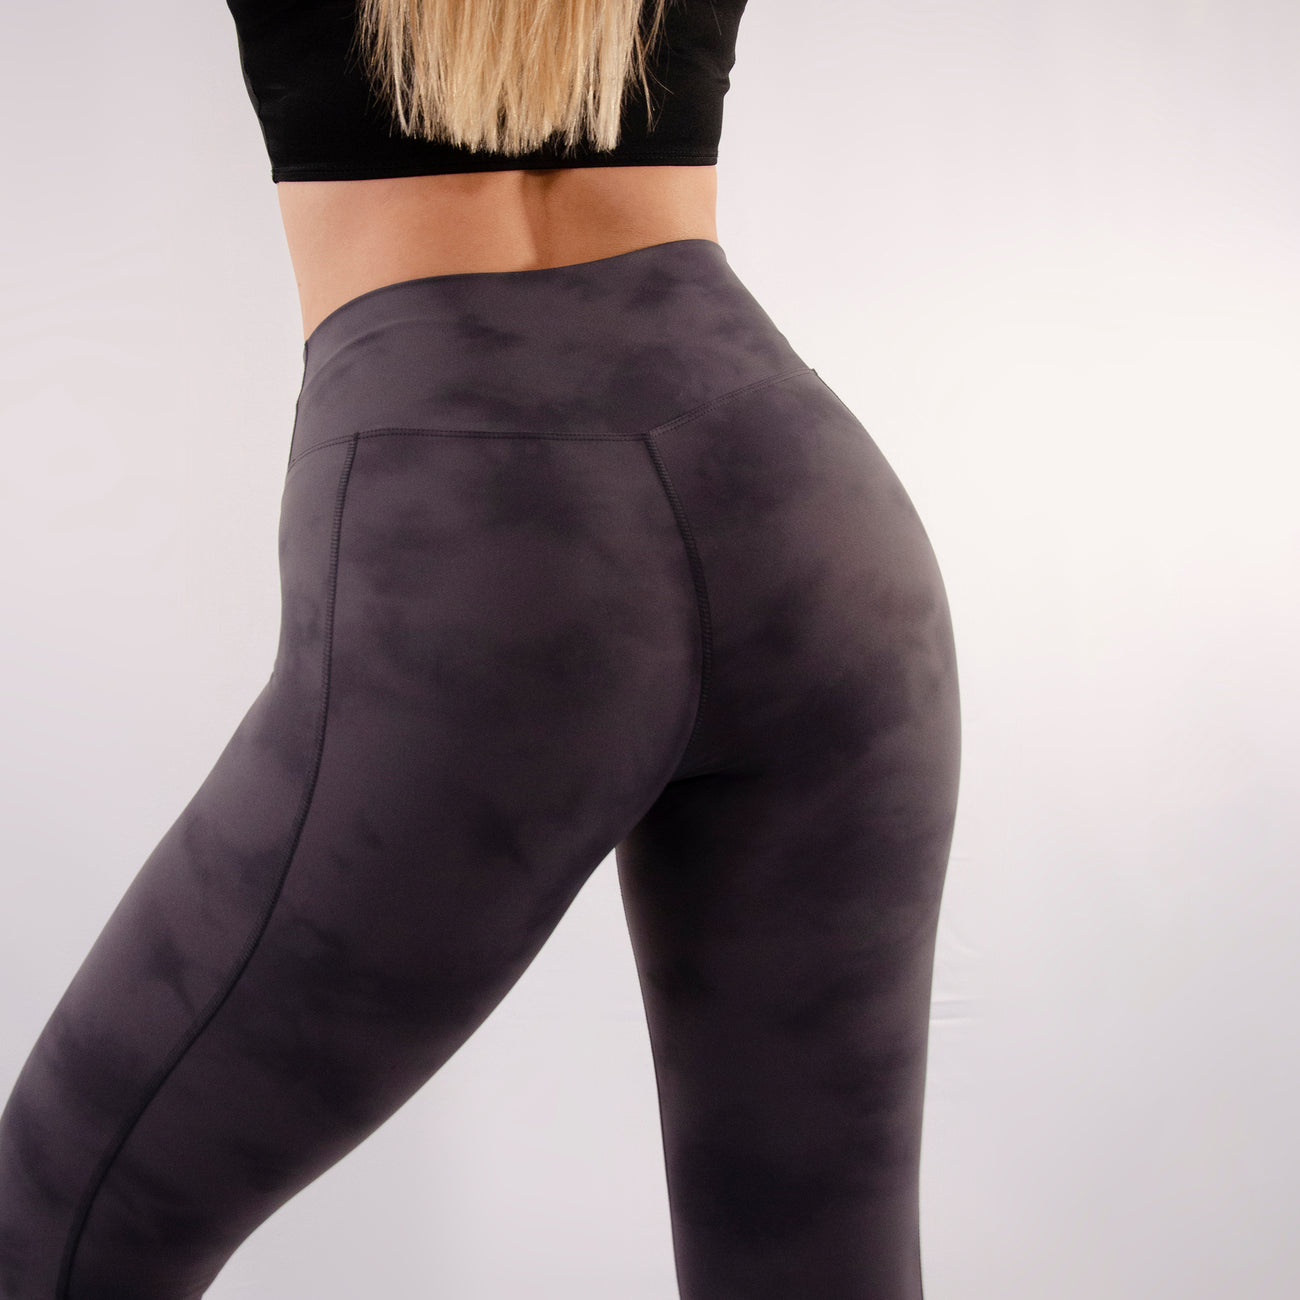 Yoga Pants Are a Force for Body Positivity